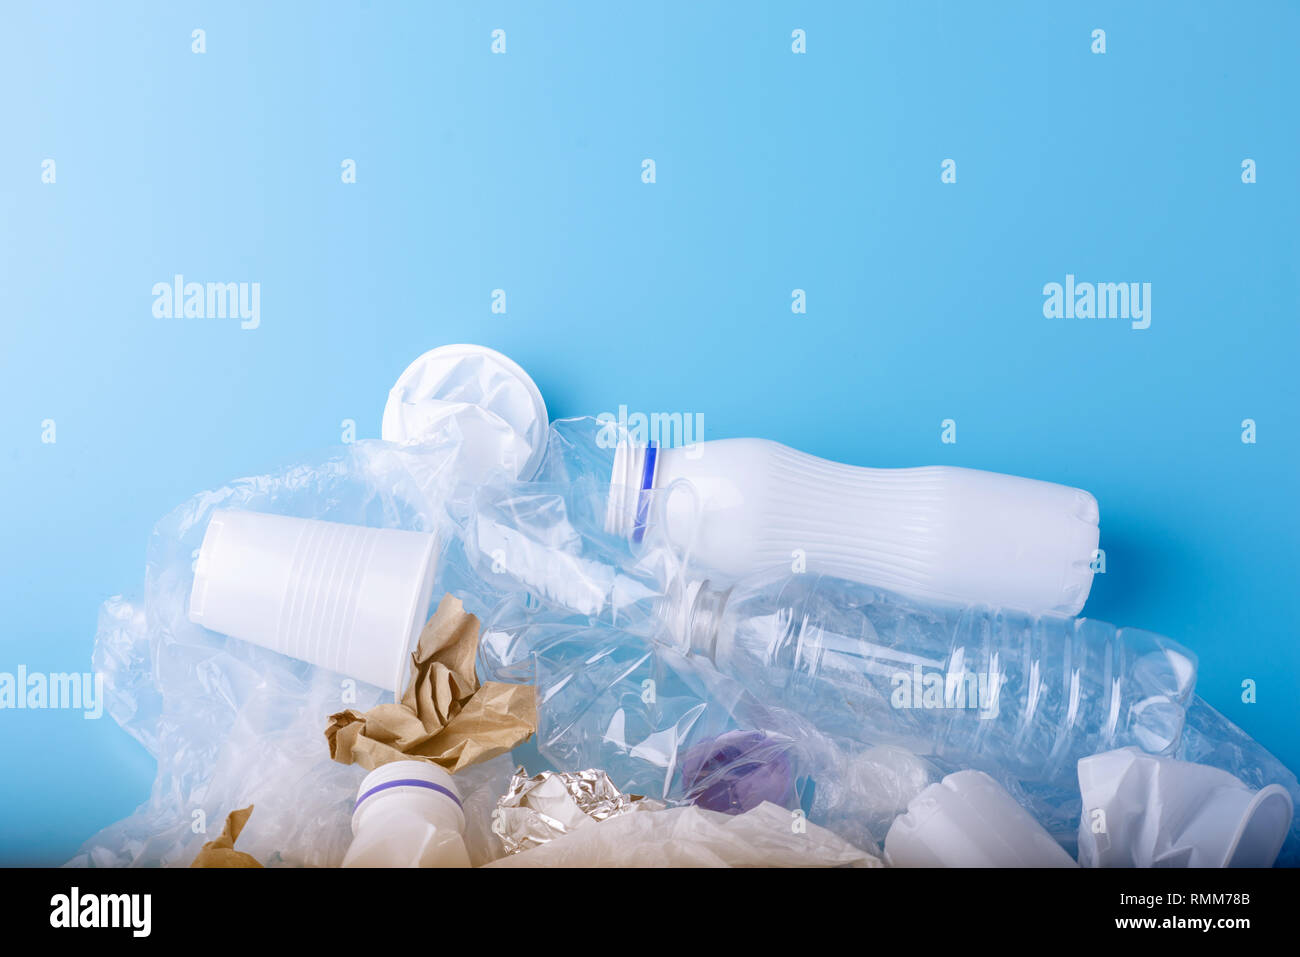 Used unsorted clean garbage in a pile. Bottles, bags and paper on blue background. Concept of environmental pollution and waste sorting Stock Photo